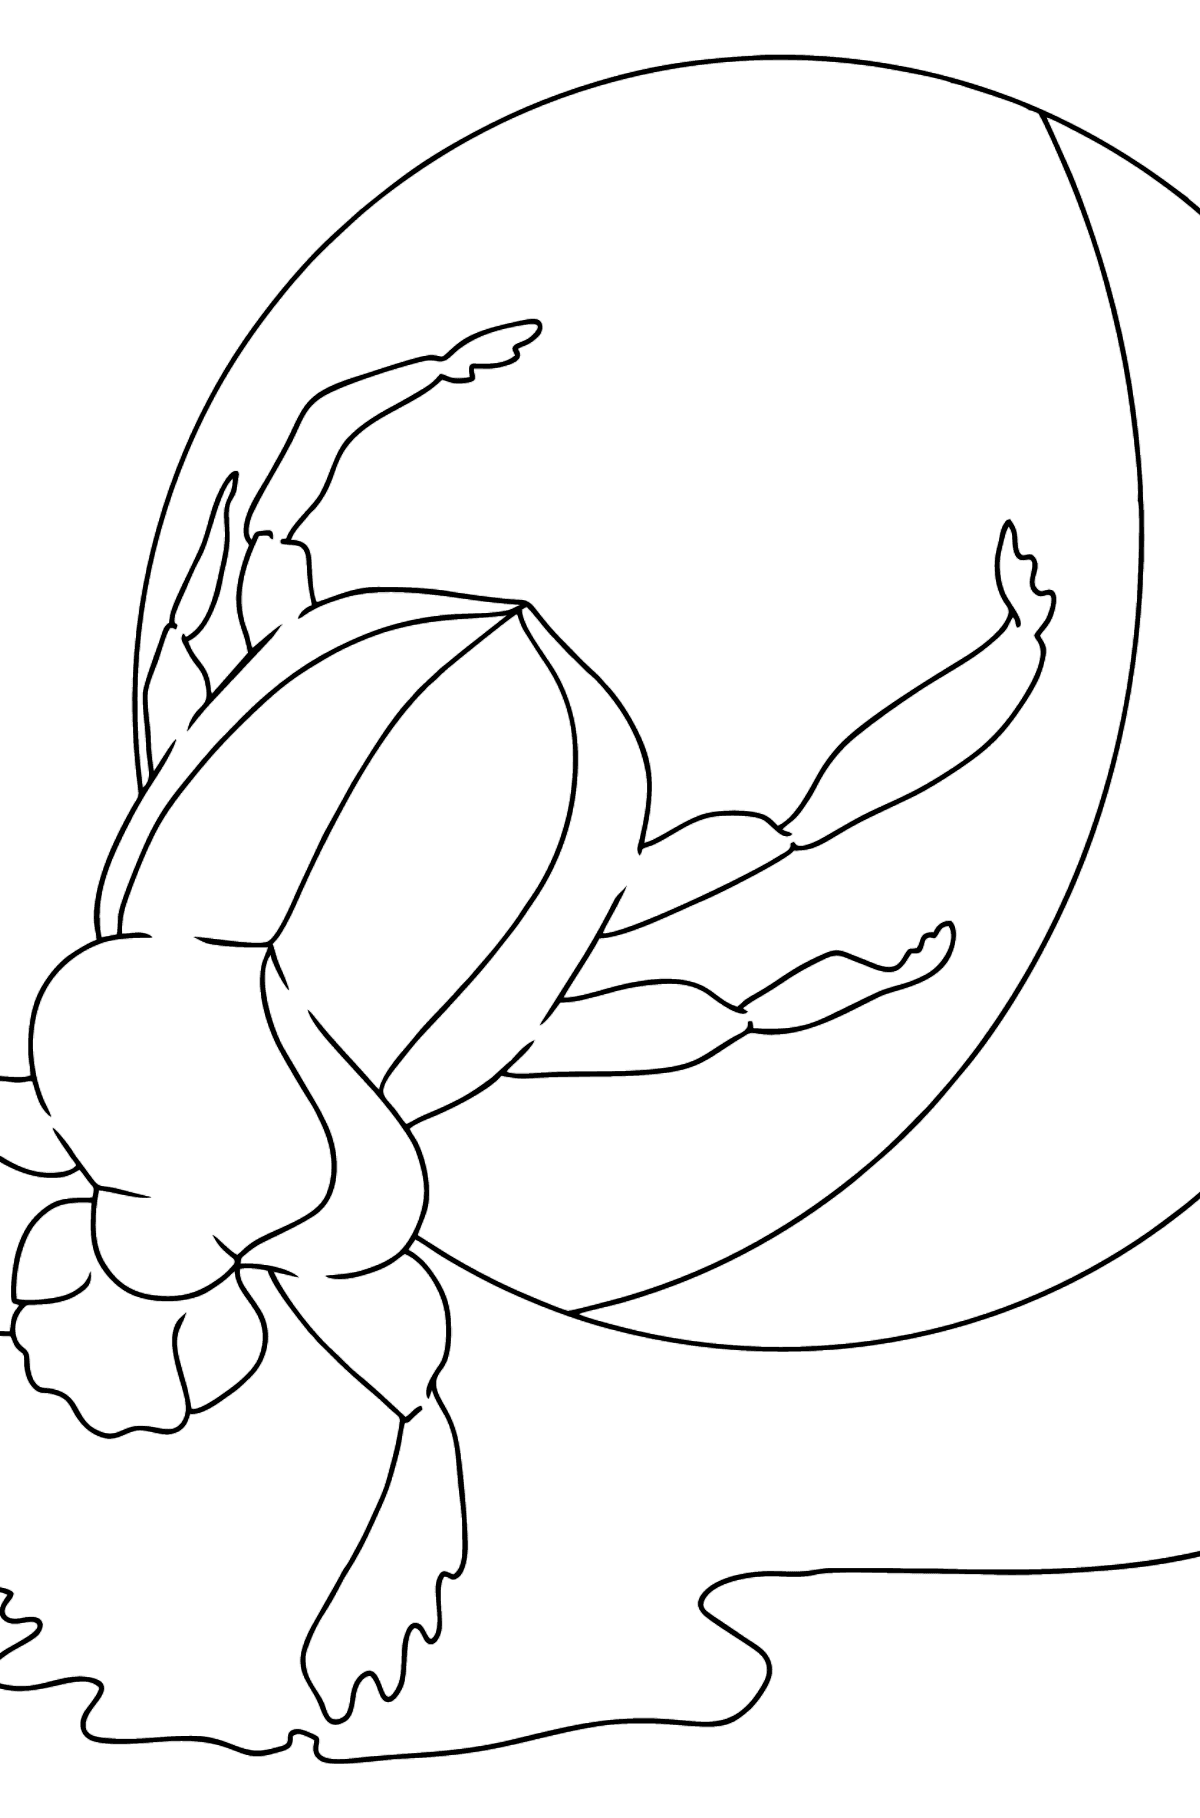 A Scarab Beetle Coloring Page - Coloring Pages for Kids